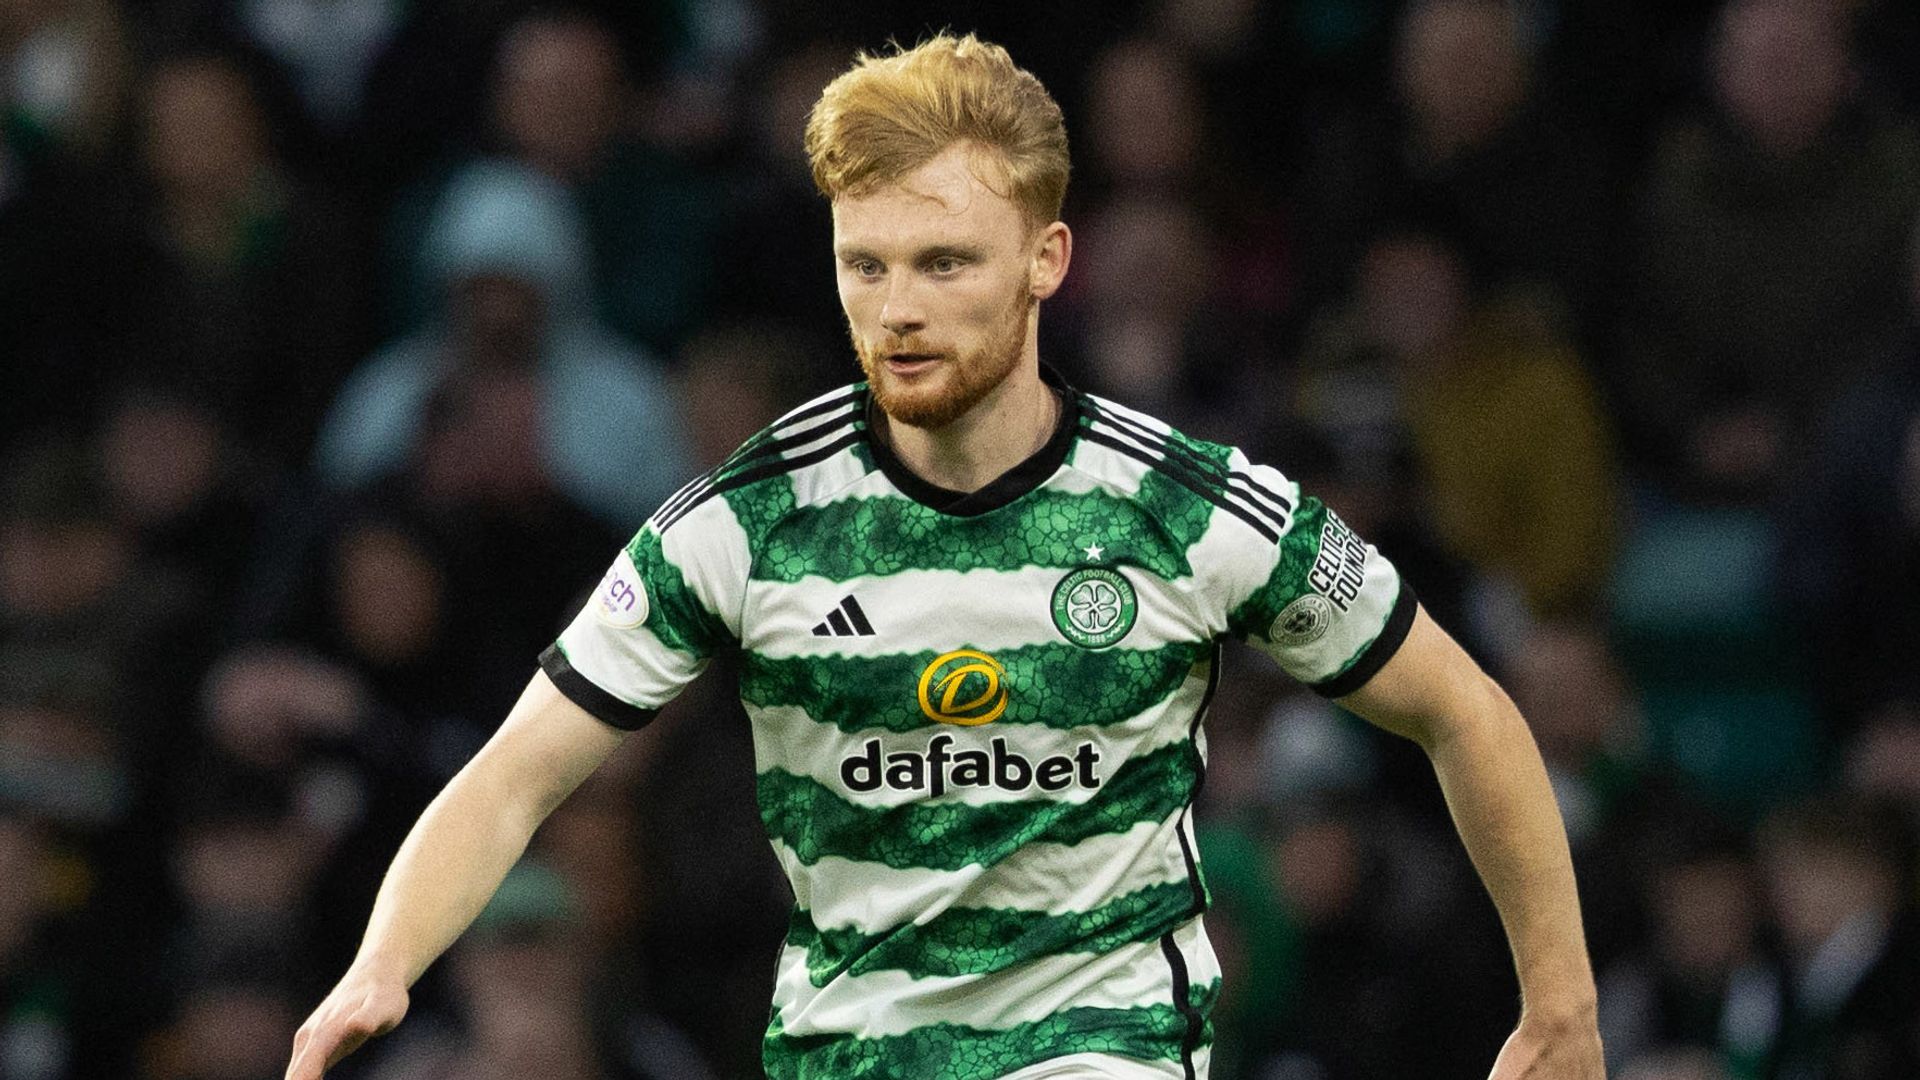 Scales urges Celtic players to 'brush up' after Rodgers criticism